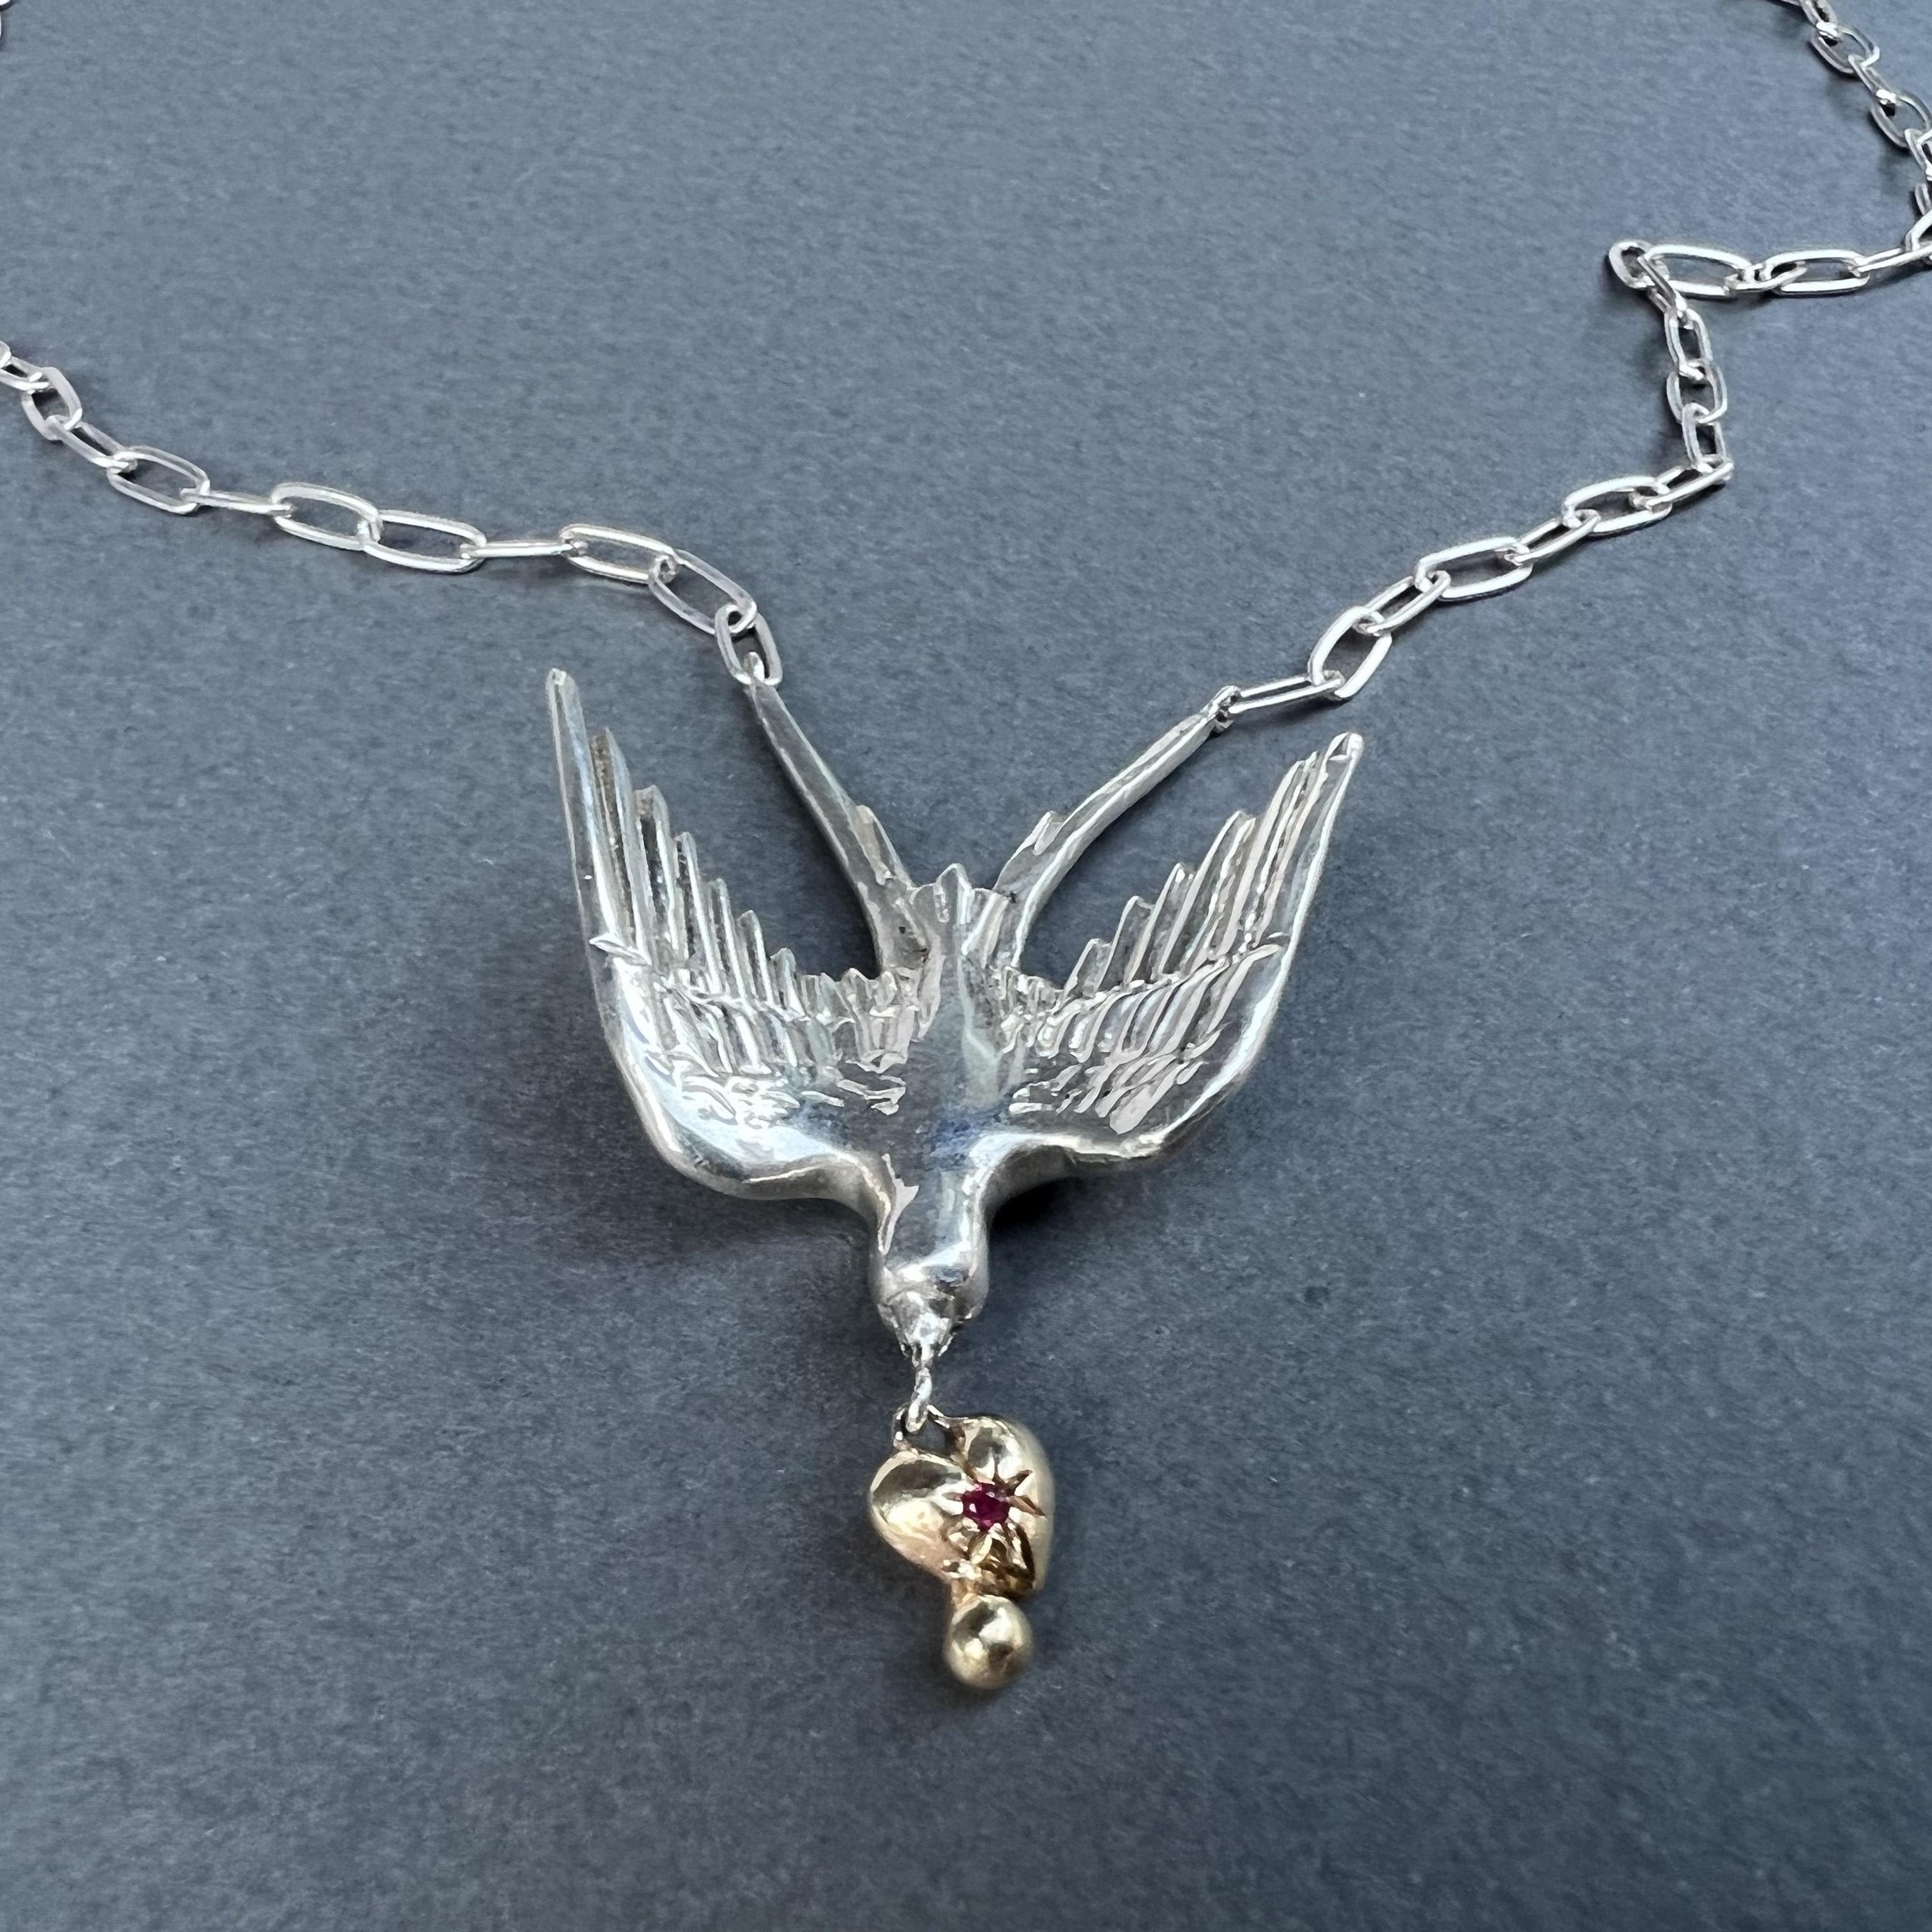 Women's Dove Chain Necklace Gold Heart Silver Ruby Victorian Style Animal jewelry For Sale